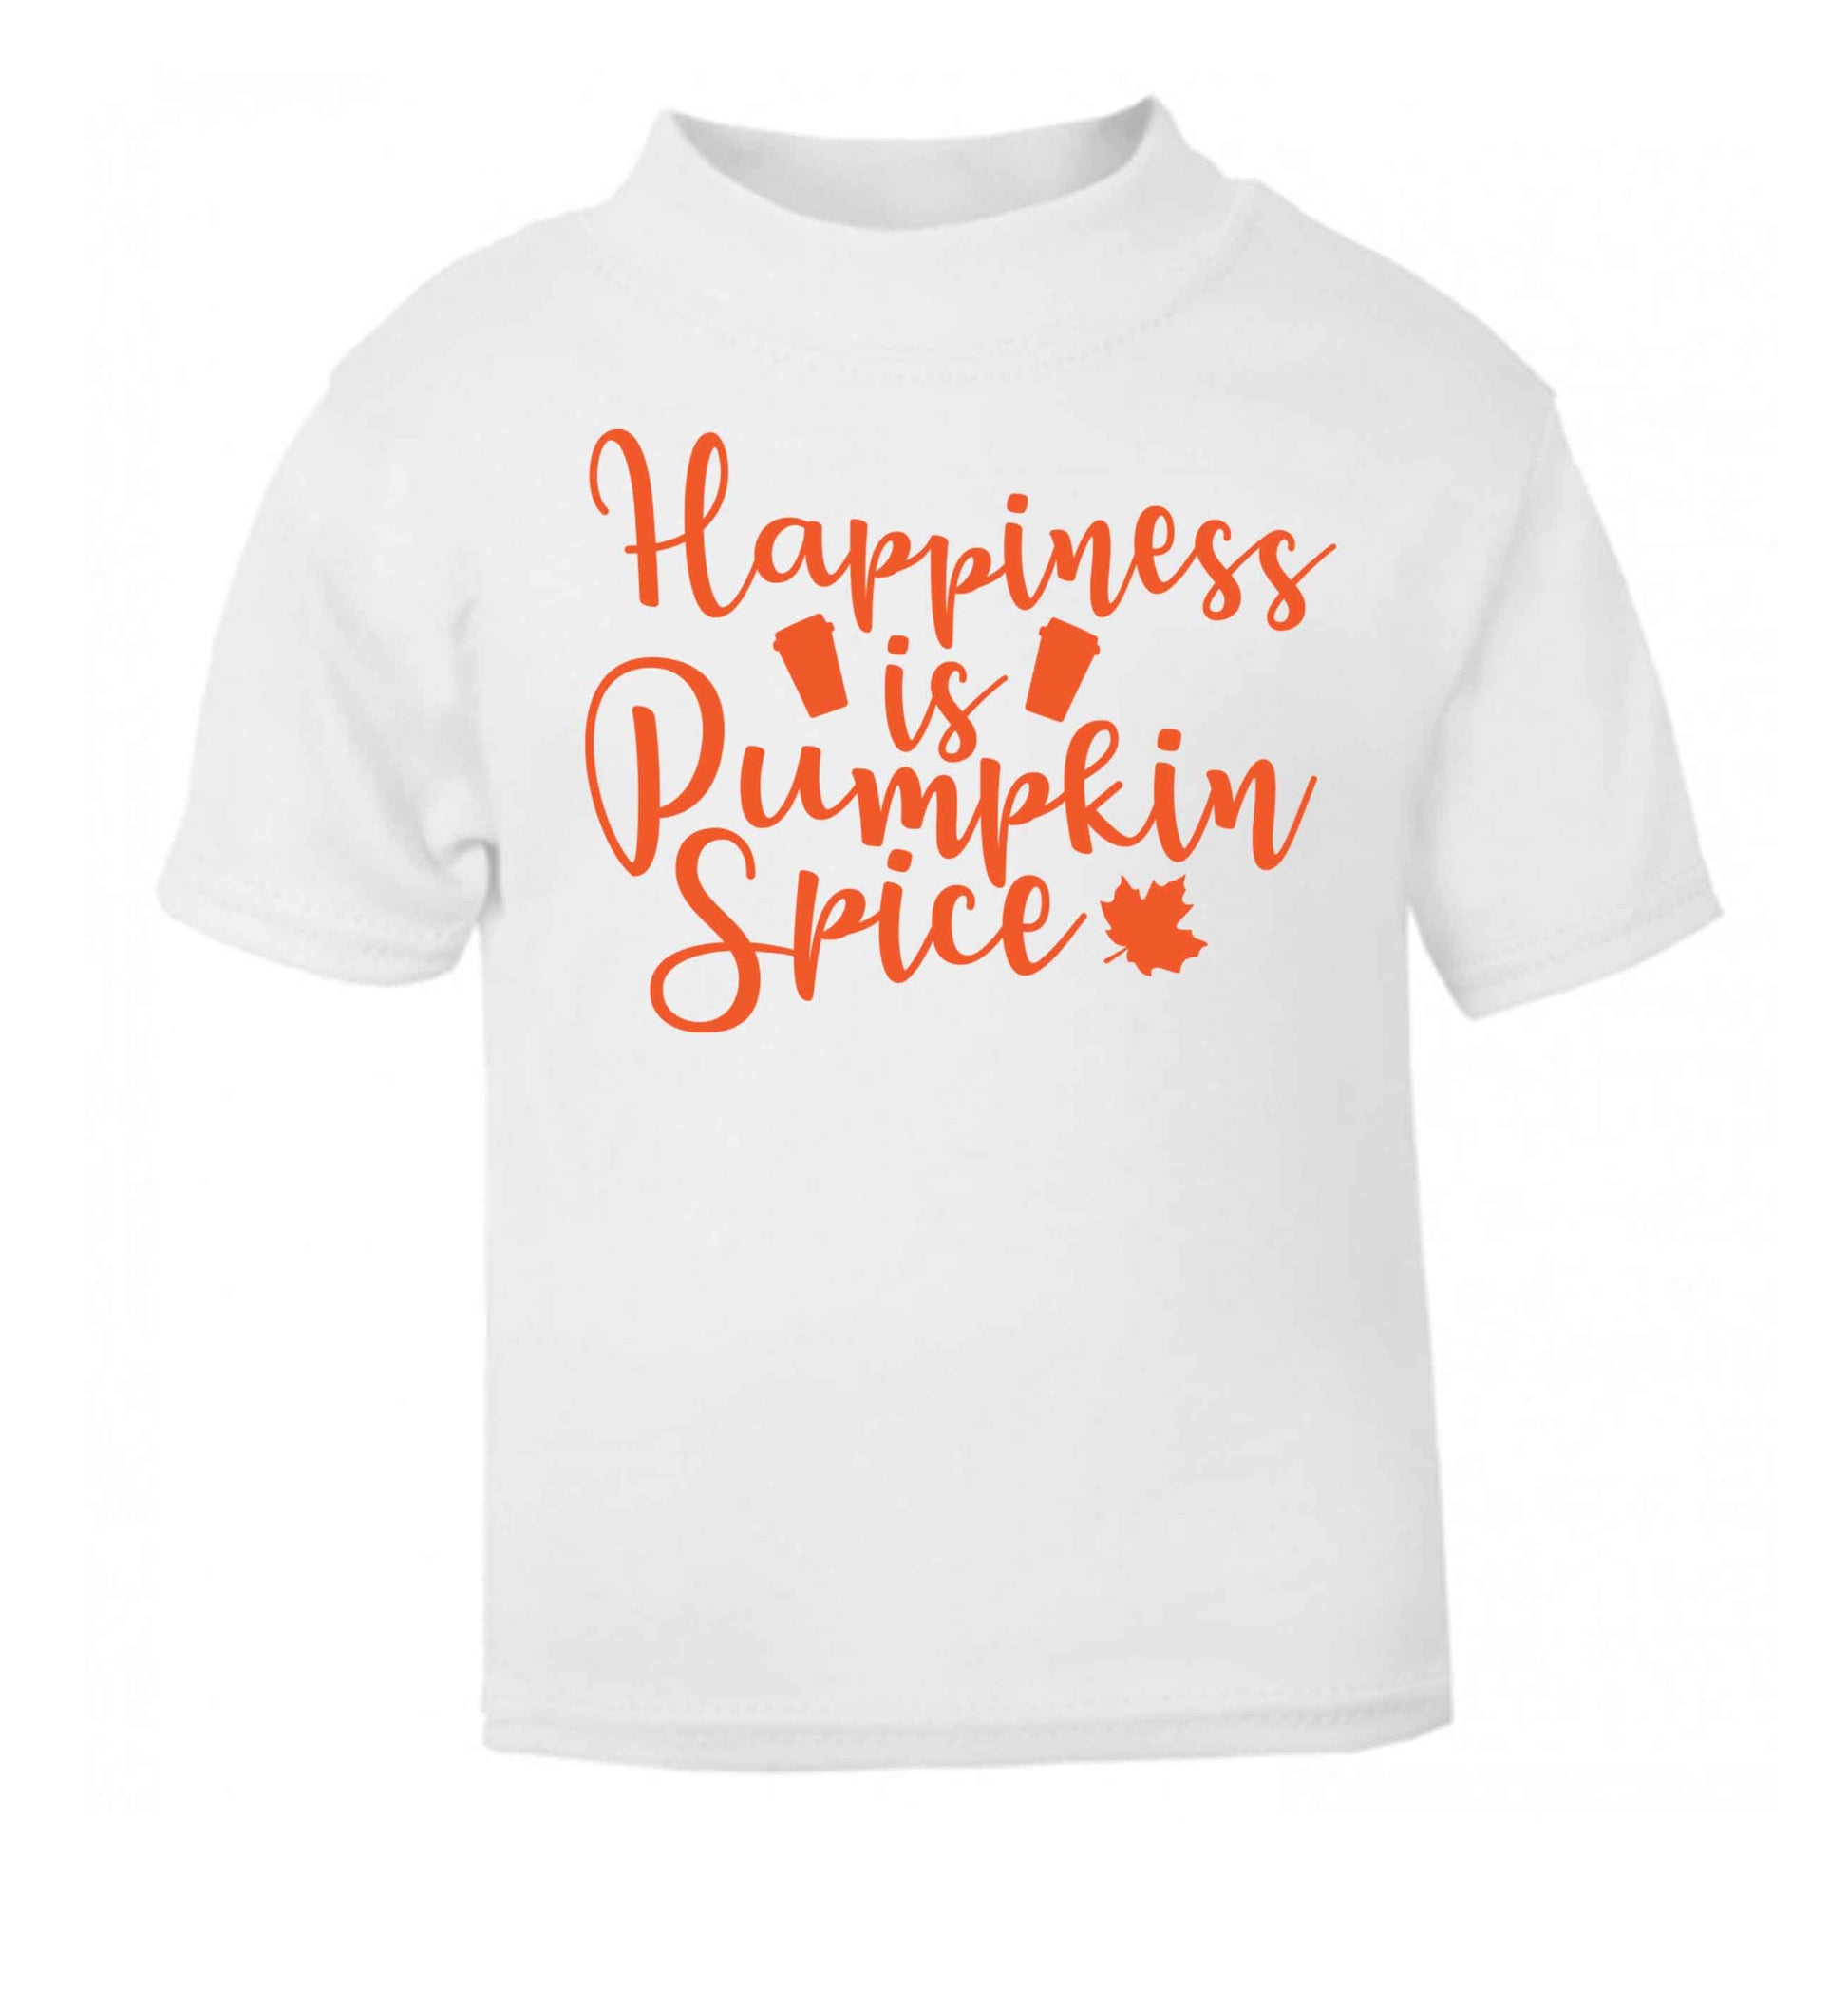 Happiness Pumpkin Spice white baby toddler Tshirt 2 Years